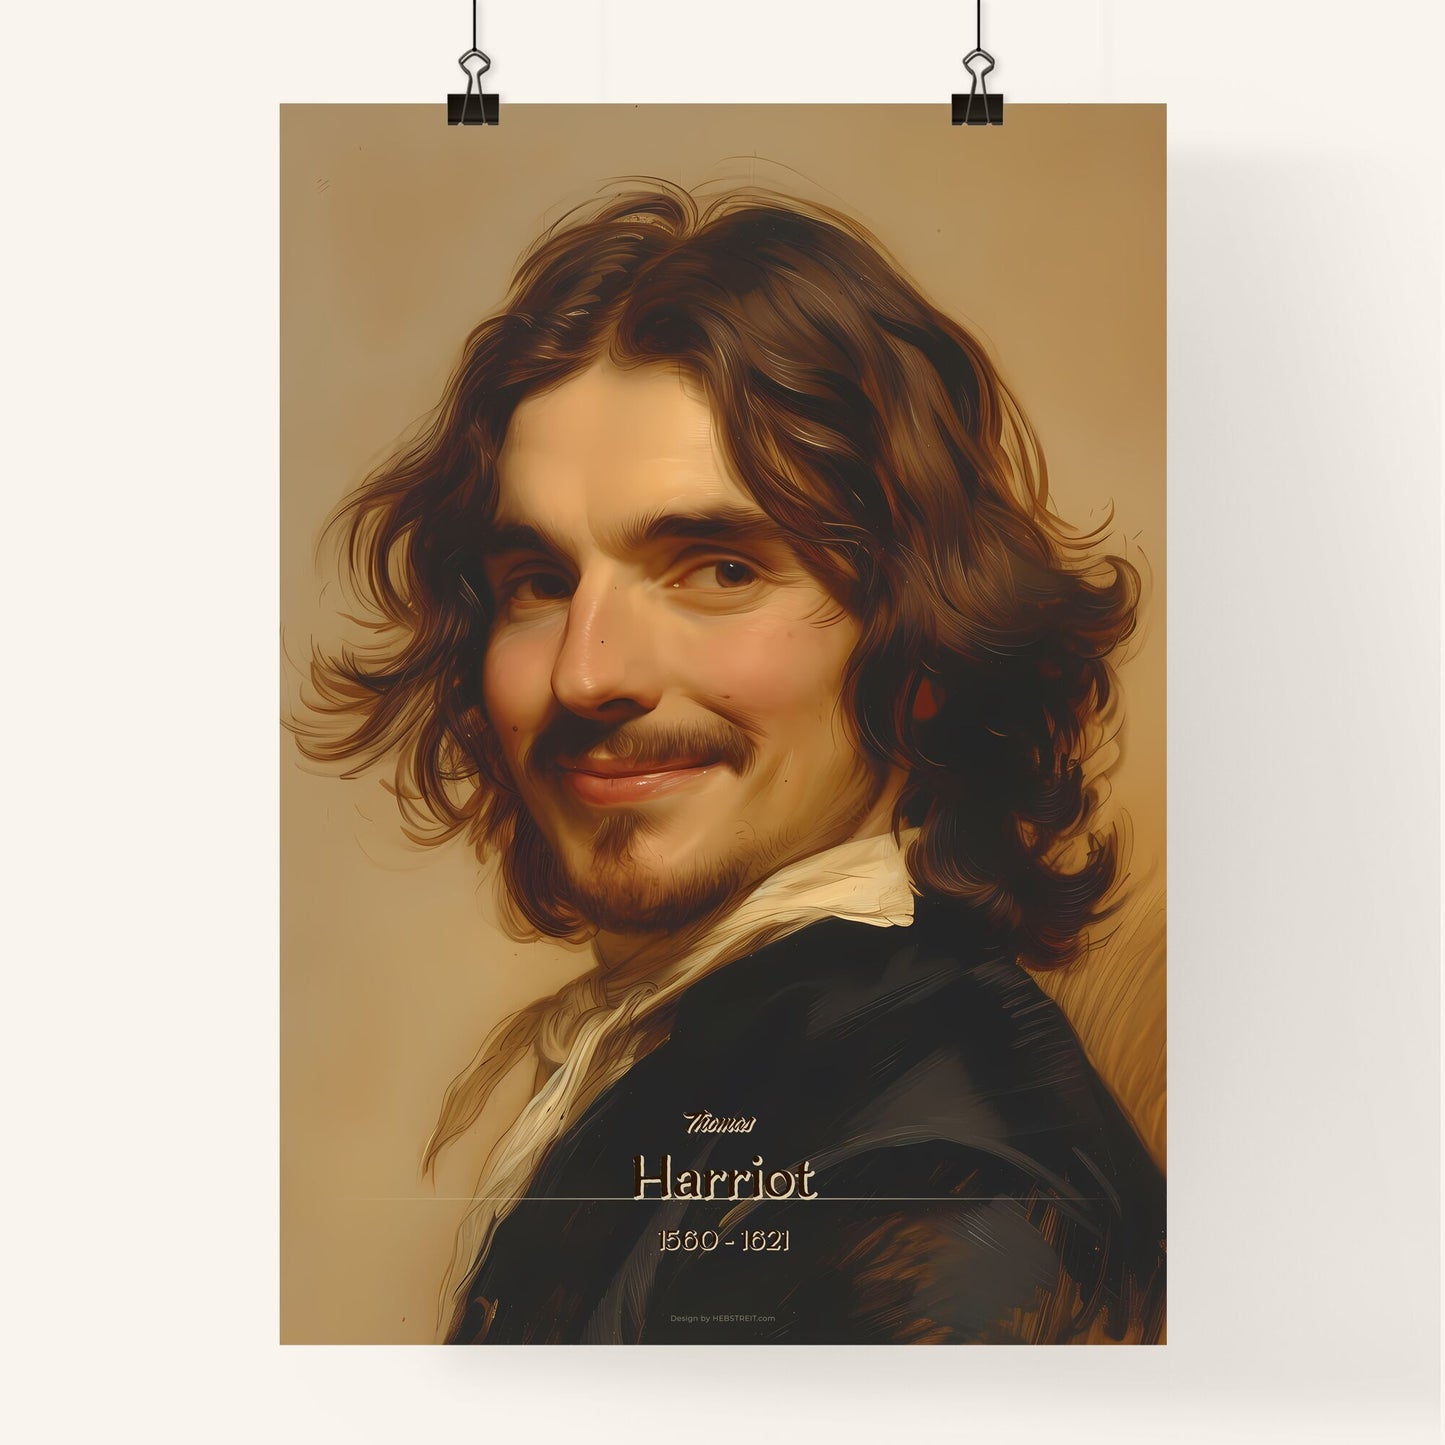 Thomas, Harriot, 1560 - 1621, A Poster of a man with long hair and beard smiling Default Title